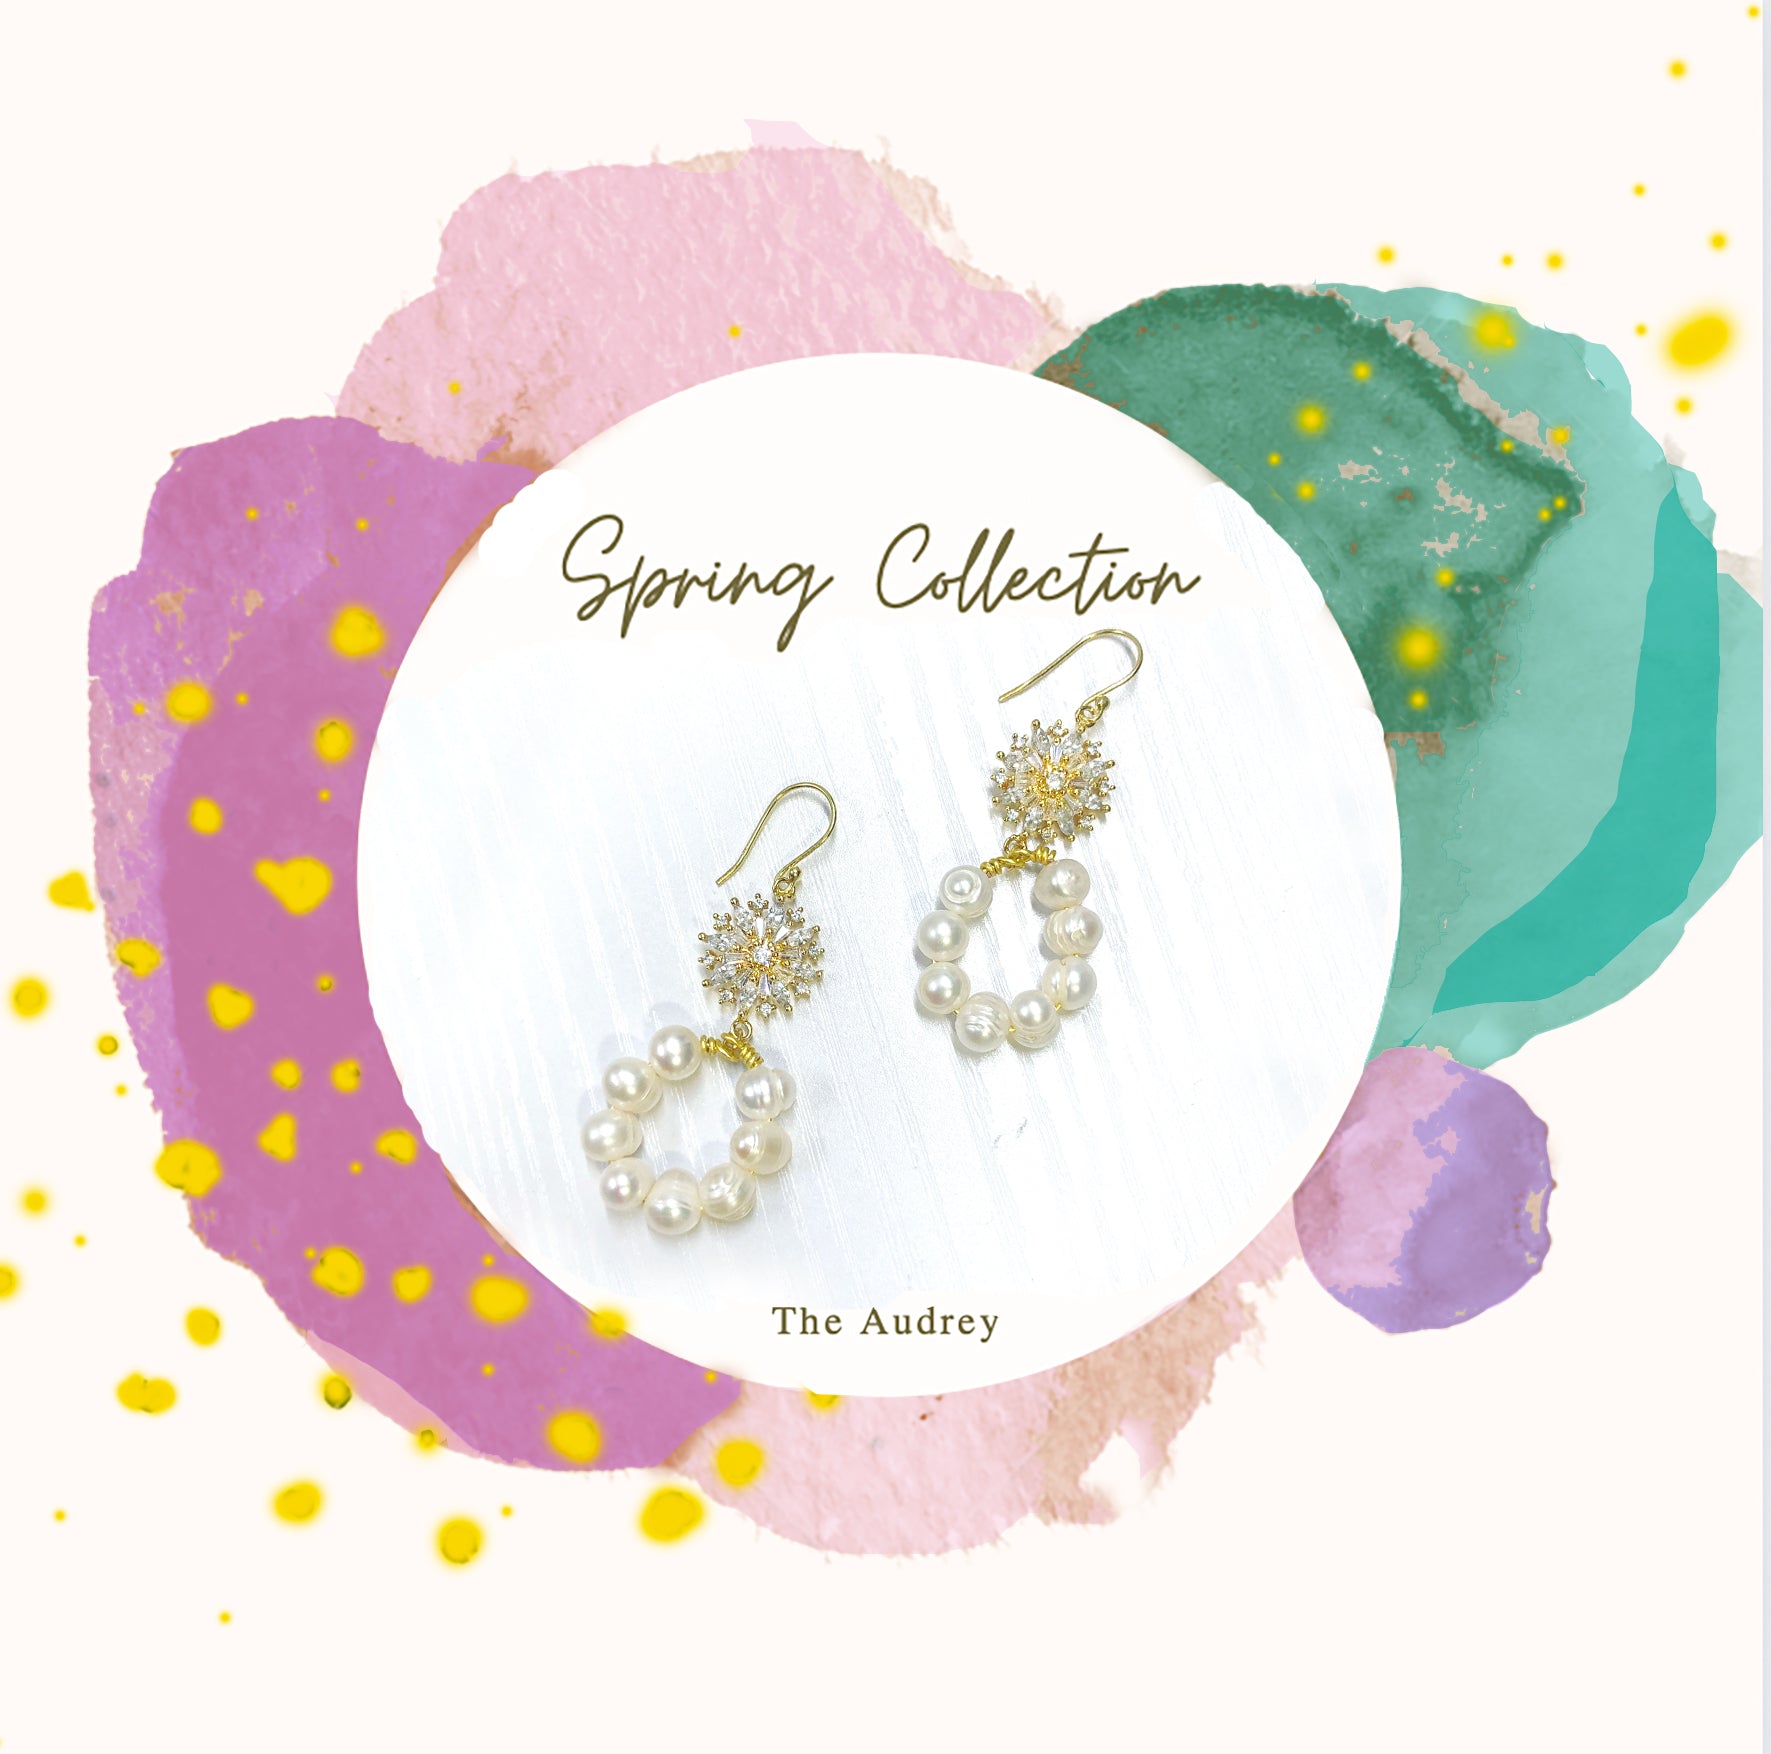 The Audrey Pearl Earrings by Sheena Solis